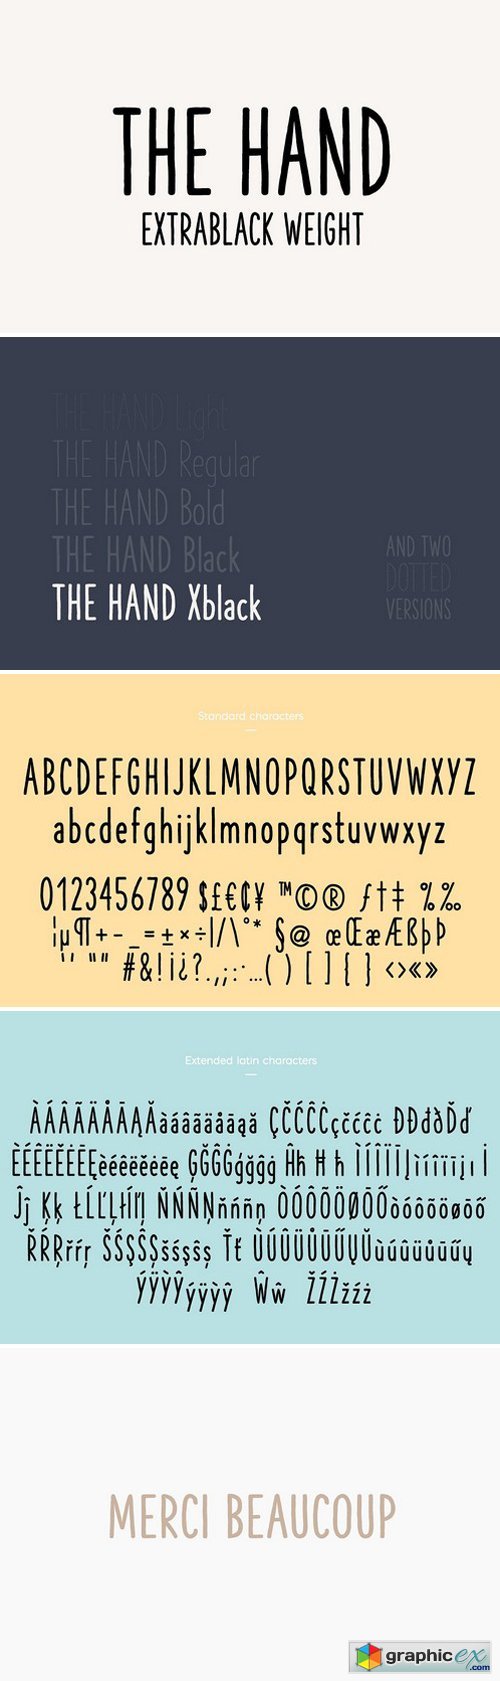 The Hand Font - Extrablack